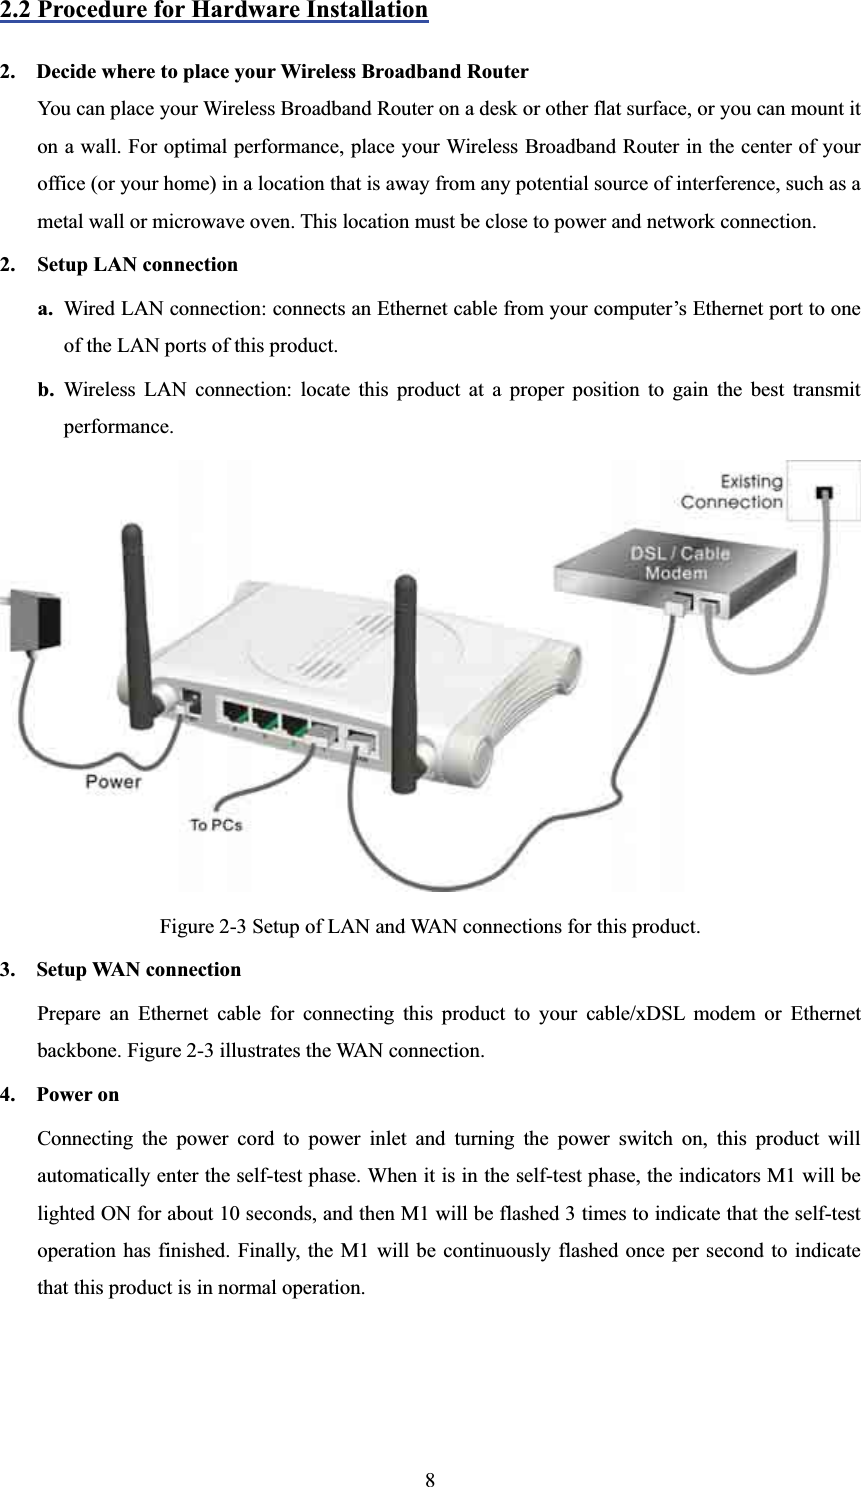 2.2 Procedure for Hardware Installation2.    Decide where to place your Wireless Broadband RouterYou can place your Wireless Broadband Router on a desk or other flat surface, or you can mount it on a wall. For optimal performance, place your Wireless Broadband Router in the center of your office (or your home) in a location that is away from any potential source of interference, such as a metal wall or microwave oven. This location must be close to power and network connection. 2. Setup LAN connectiona. Wired LAN connection: connects an Ethernet cable from your computer’s Ethernet port to one of the LAN ports of this product. b. Wireless LAN connection: locate this product at a proper position to gain the best transmit performance. Figure 2-3 Setup of LAN and WAN connections for this product. 3.  Setup WAN connectionPrepare an Ethernet cable for connecting this product to your cable/xDSL modem or Ethernet backbone. Figure 2-3 illustrates the WAN connection. 4.  Power on  Connecting the power cord to power inlet and turning the power switch on, this product will automatically enter the self-test phase. When it is in the self-test phase, the indicators M1 will be lighted ON for about 10 seconds, and then M1 will be flashed 3 times to indicate that the self-test operation has finished. Finally, the M1 will be continuously flashed once per second to indicate that this product is in normal operation. 8